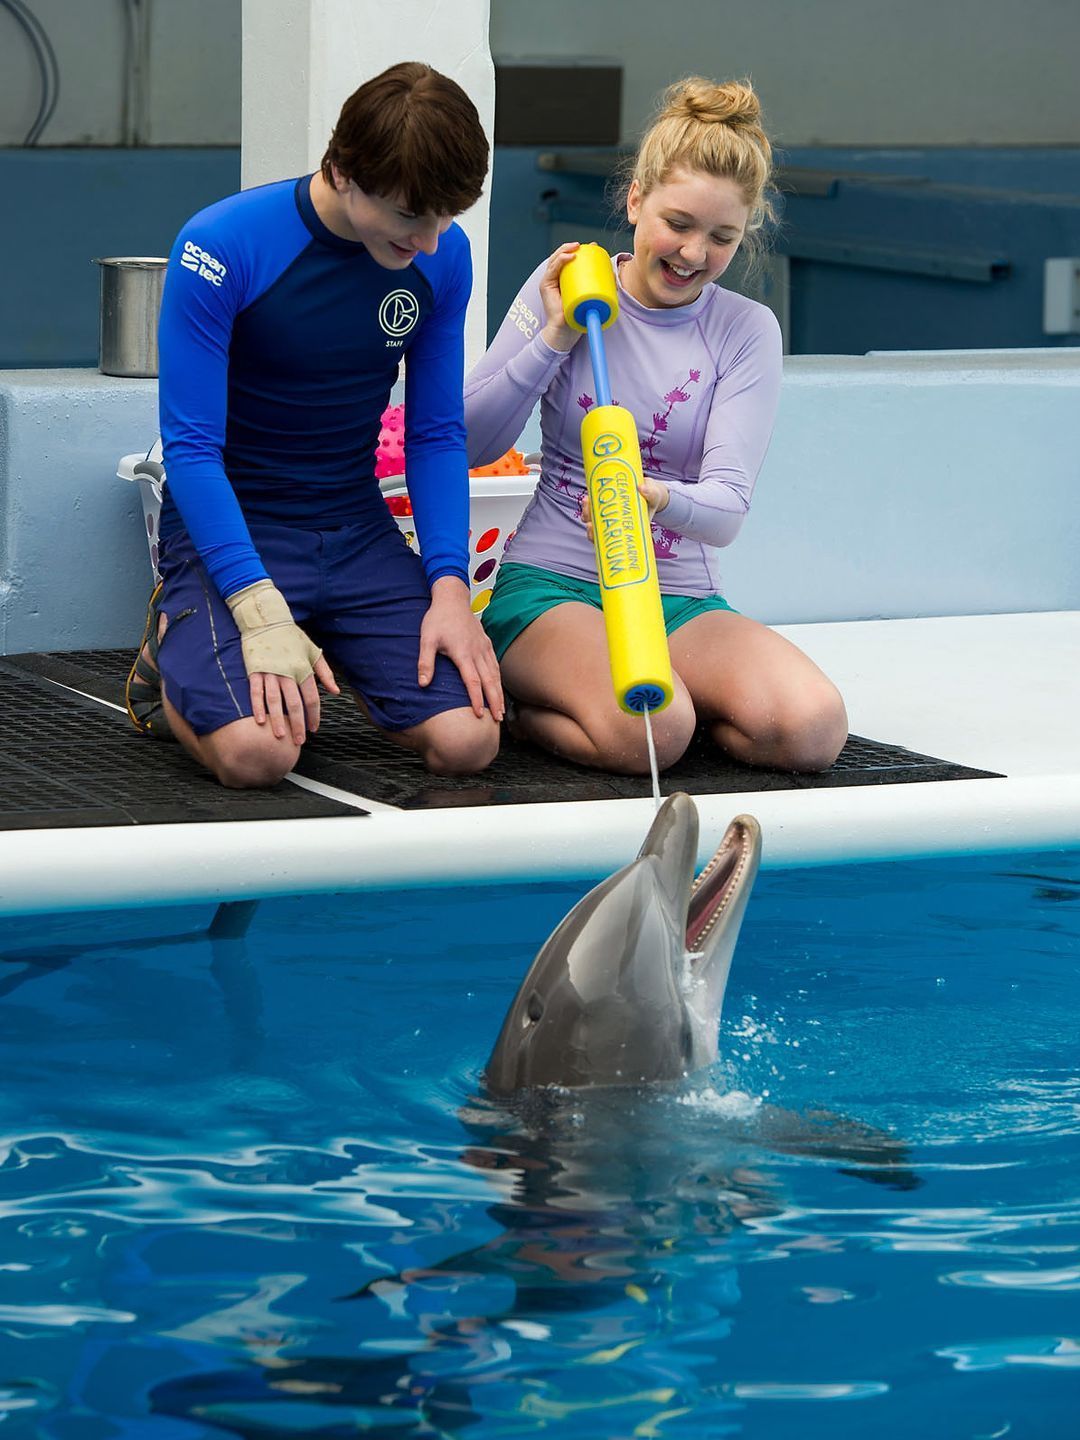 Nathan Gamble (left) and Cozi Zuehlsdorff (right) feeding dolphin